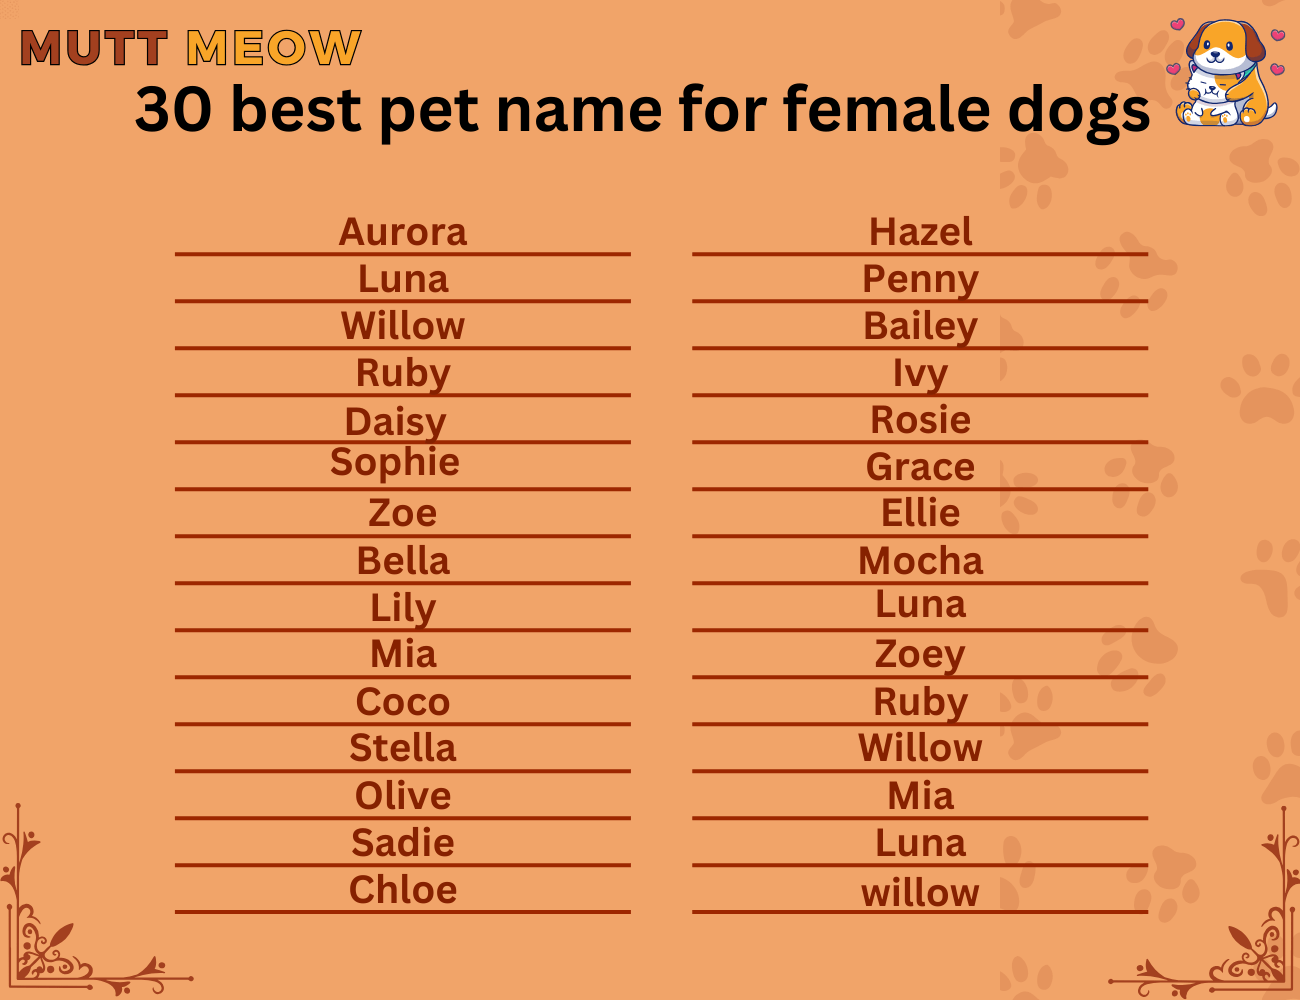 30 best pet name for female dogs